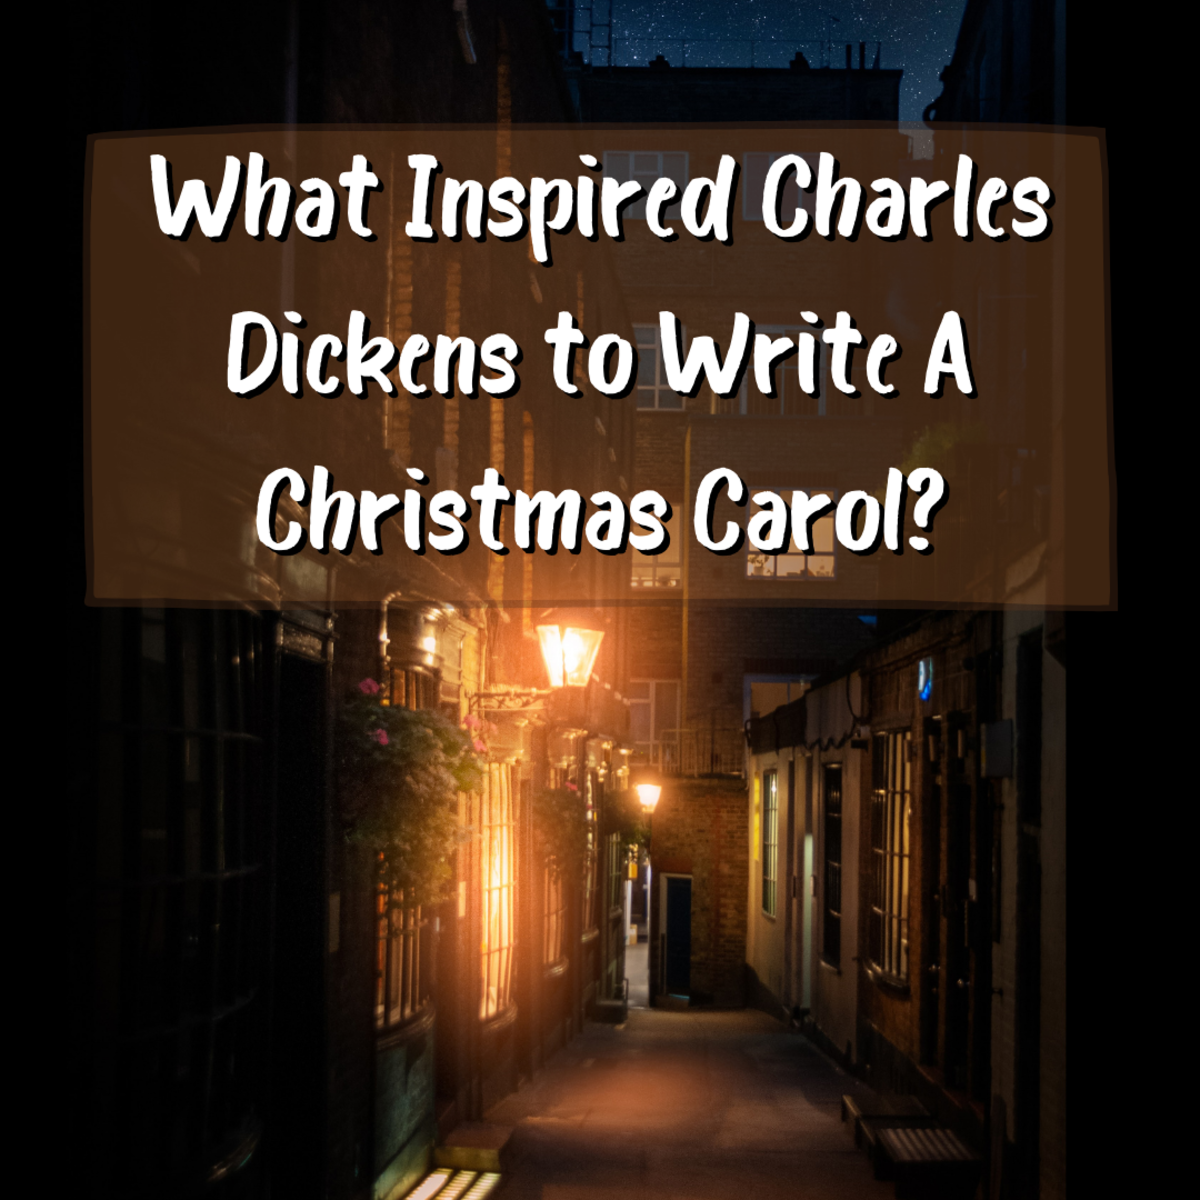 In this article, you'll learn about what inspired Charles Dickens to write A Christmas Carol. The origins of the book might surprise today's readers!